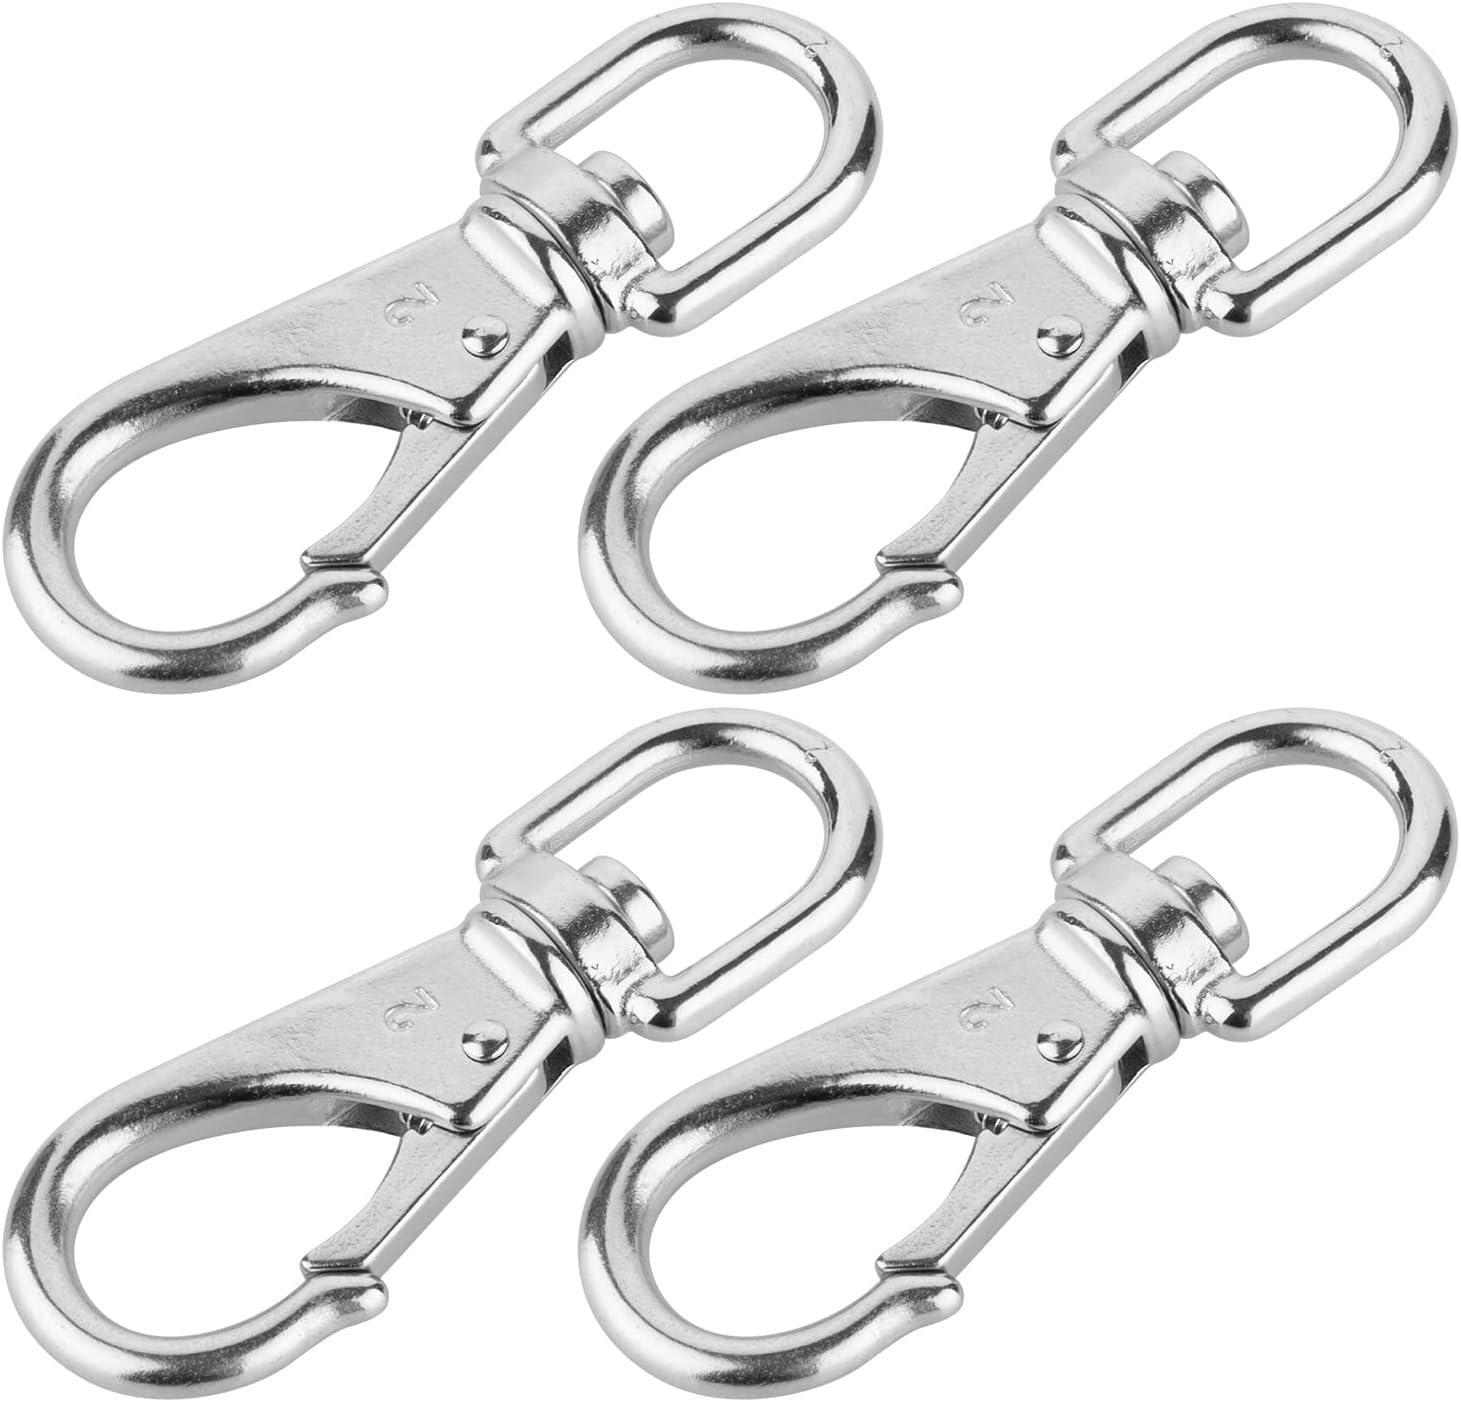  BNYZWOT Stainless Steel Swivel Eye Snap Hooks M7(3#) Scuba  Diving Clips (4-3/4 x 1-5/8 Inch) Boat Marine Spring Buckles for Bird  Feeders, Dog Leash, Pet Chains, D-Rings, Bag Straps and